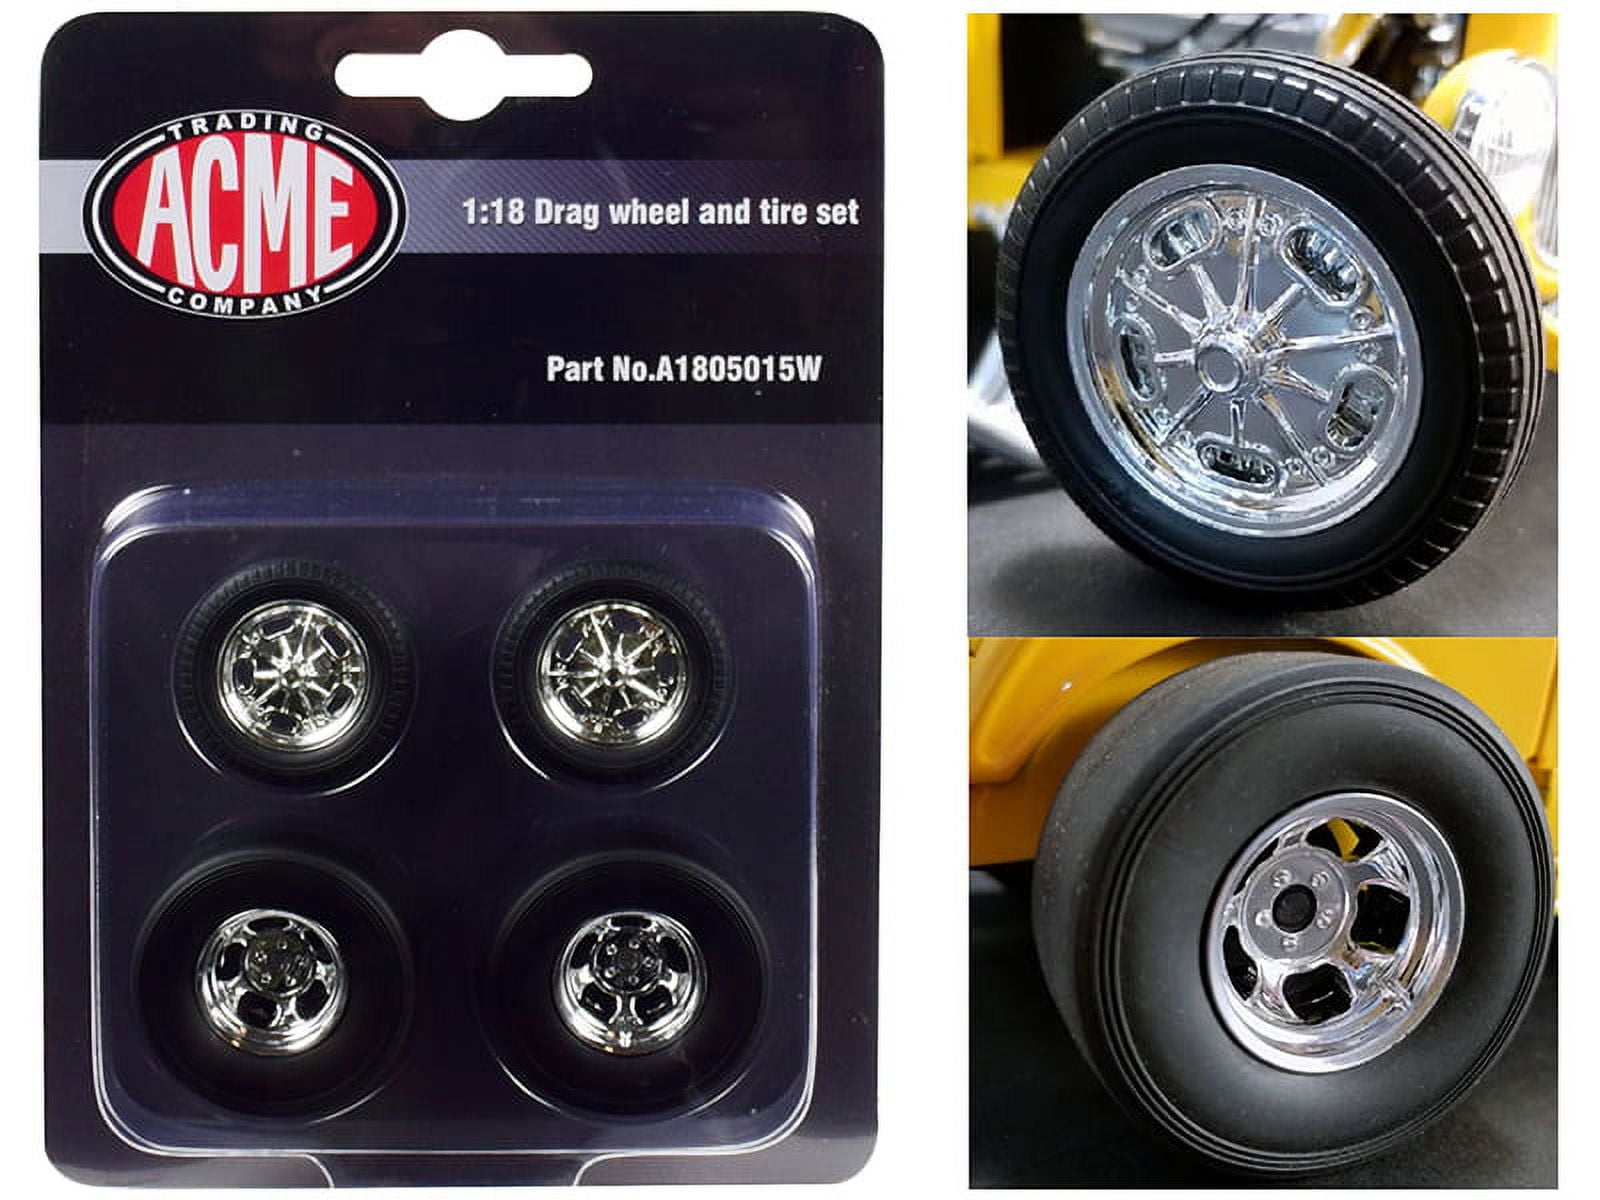 A1805015w 1 By 18 Scale Chrome Drag Wheel & Tire Set For 1932 Ford 3 Window Model - 4 Piece